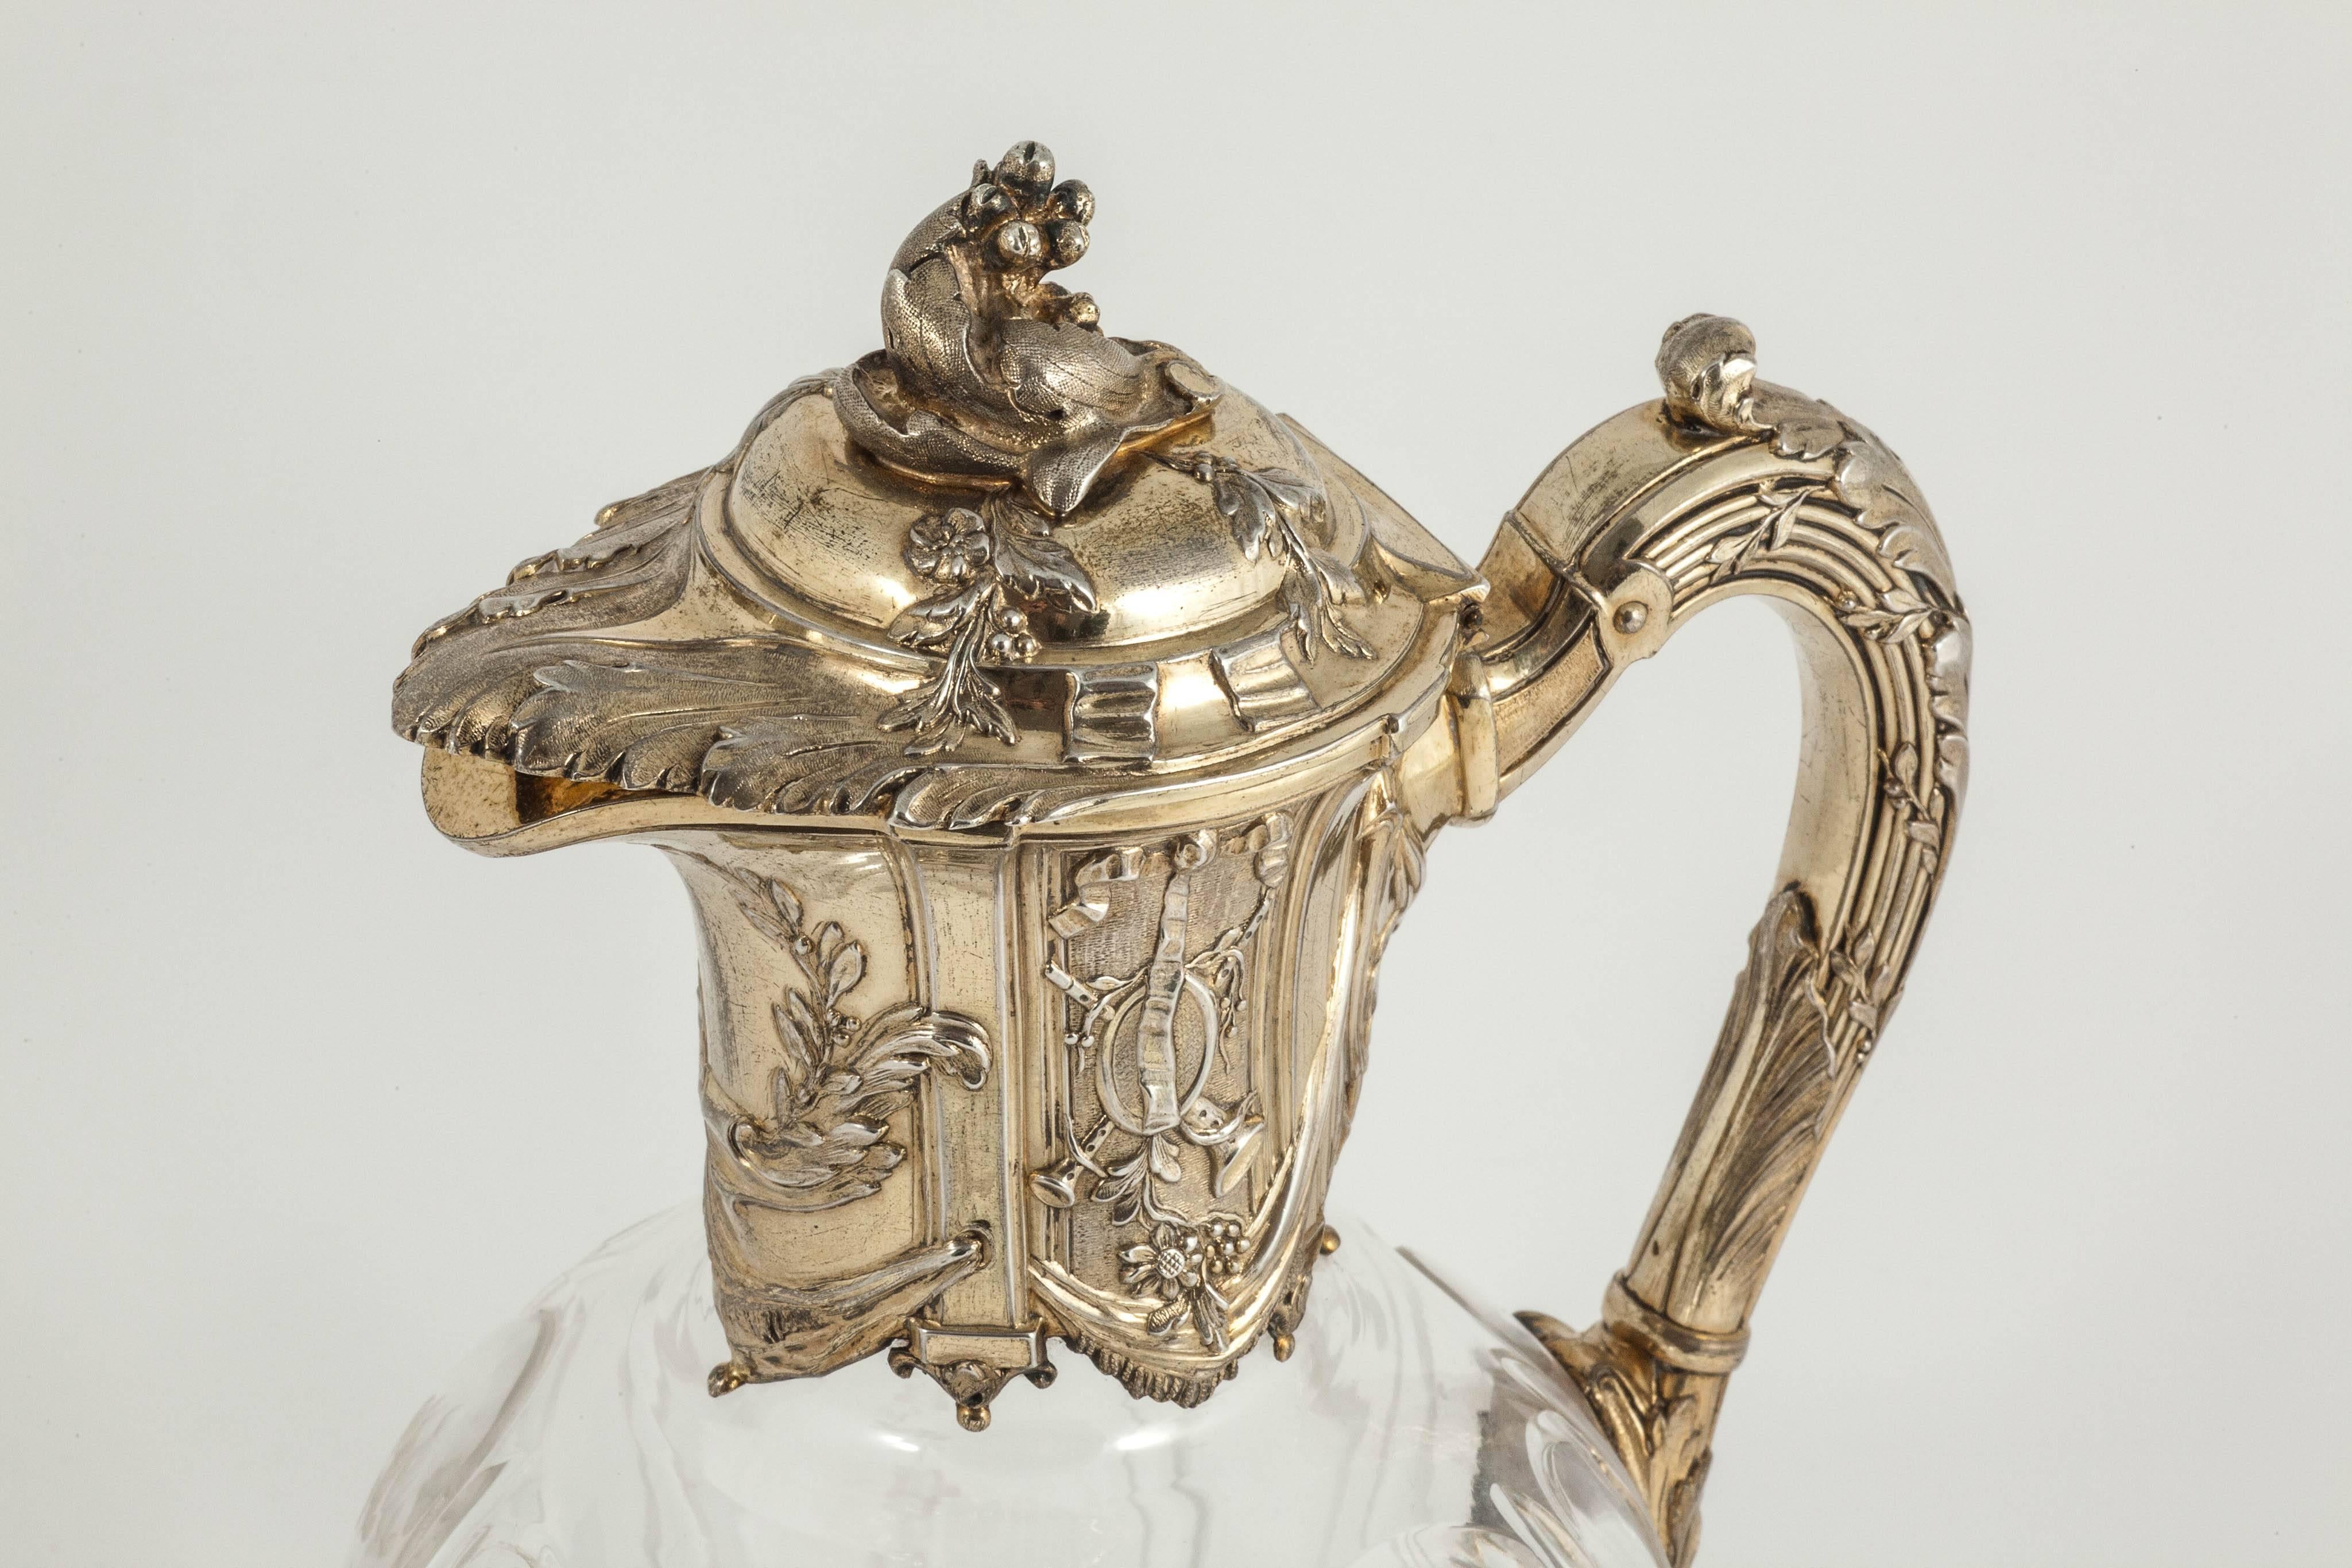 A lovely English hand-cut crystal claret jug or wine jug with gold-plated sterling silver mounts in the French style.The silver-gilt collar is decorated with panels on both sides, one showing musical instruments and the other depicting gardening